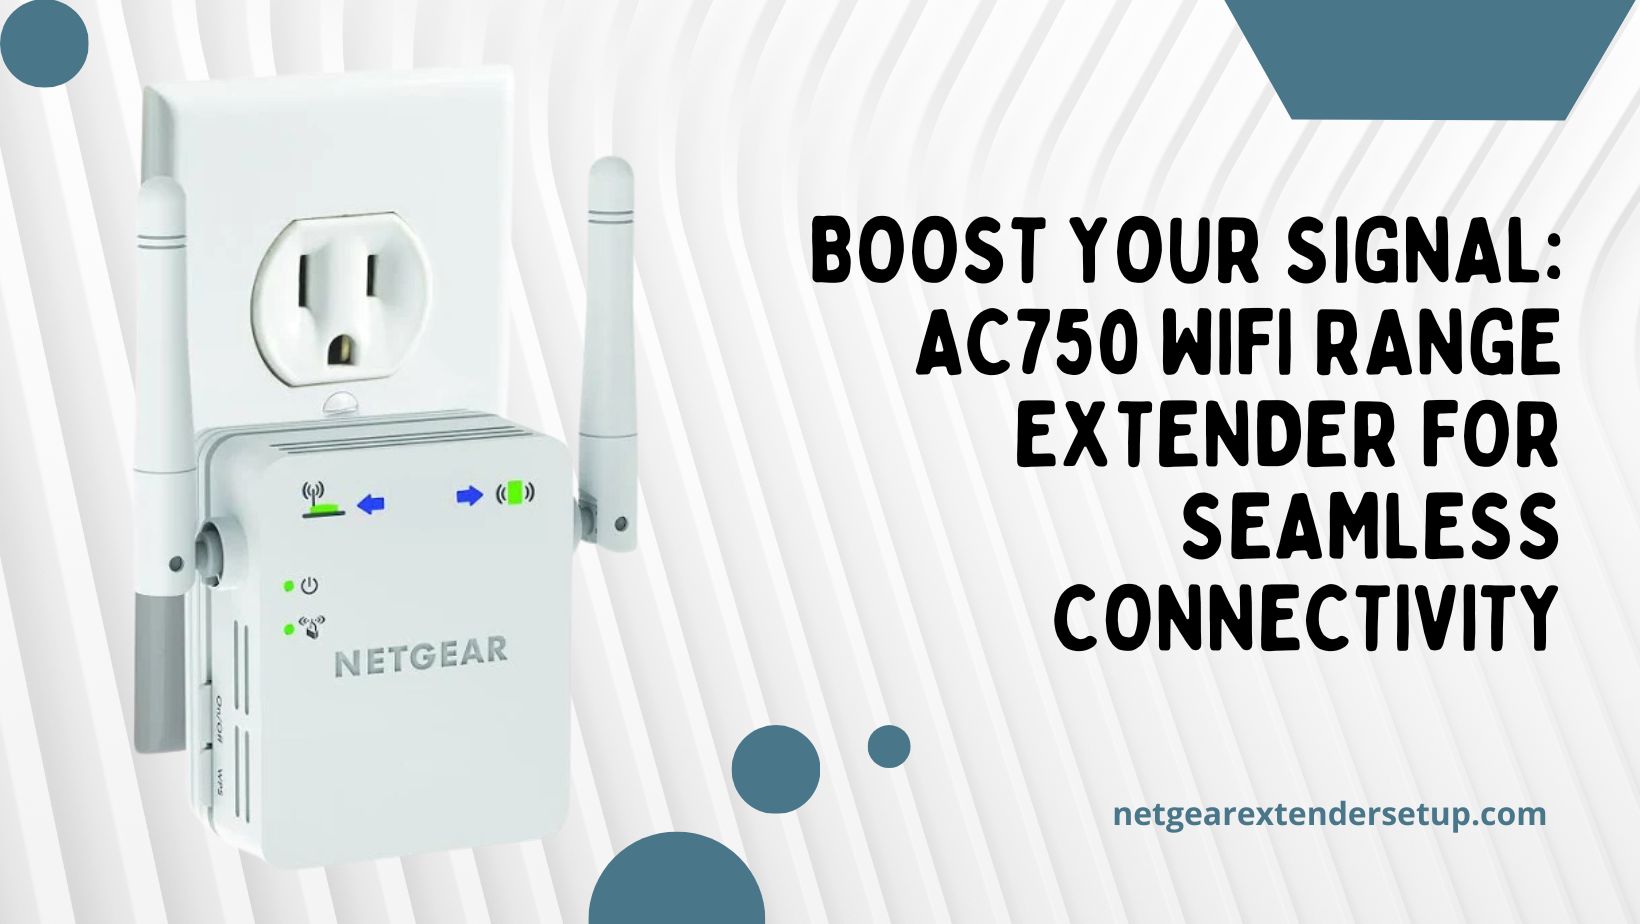 You are currently viewing Boost Your Signal: AC750 WiFi Range Extender for Seamless Connectivity